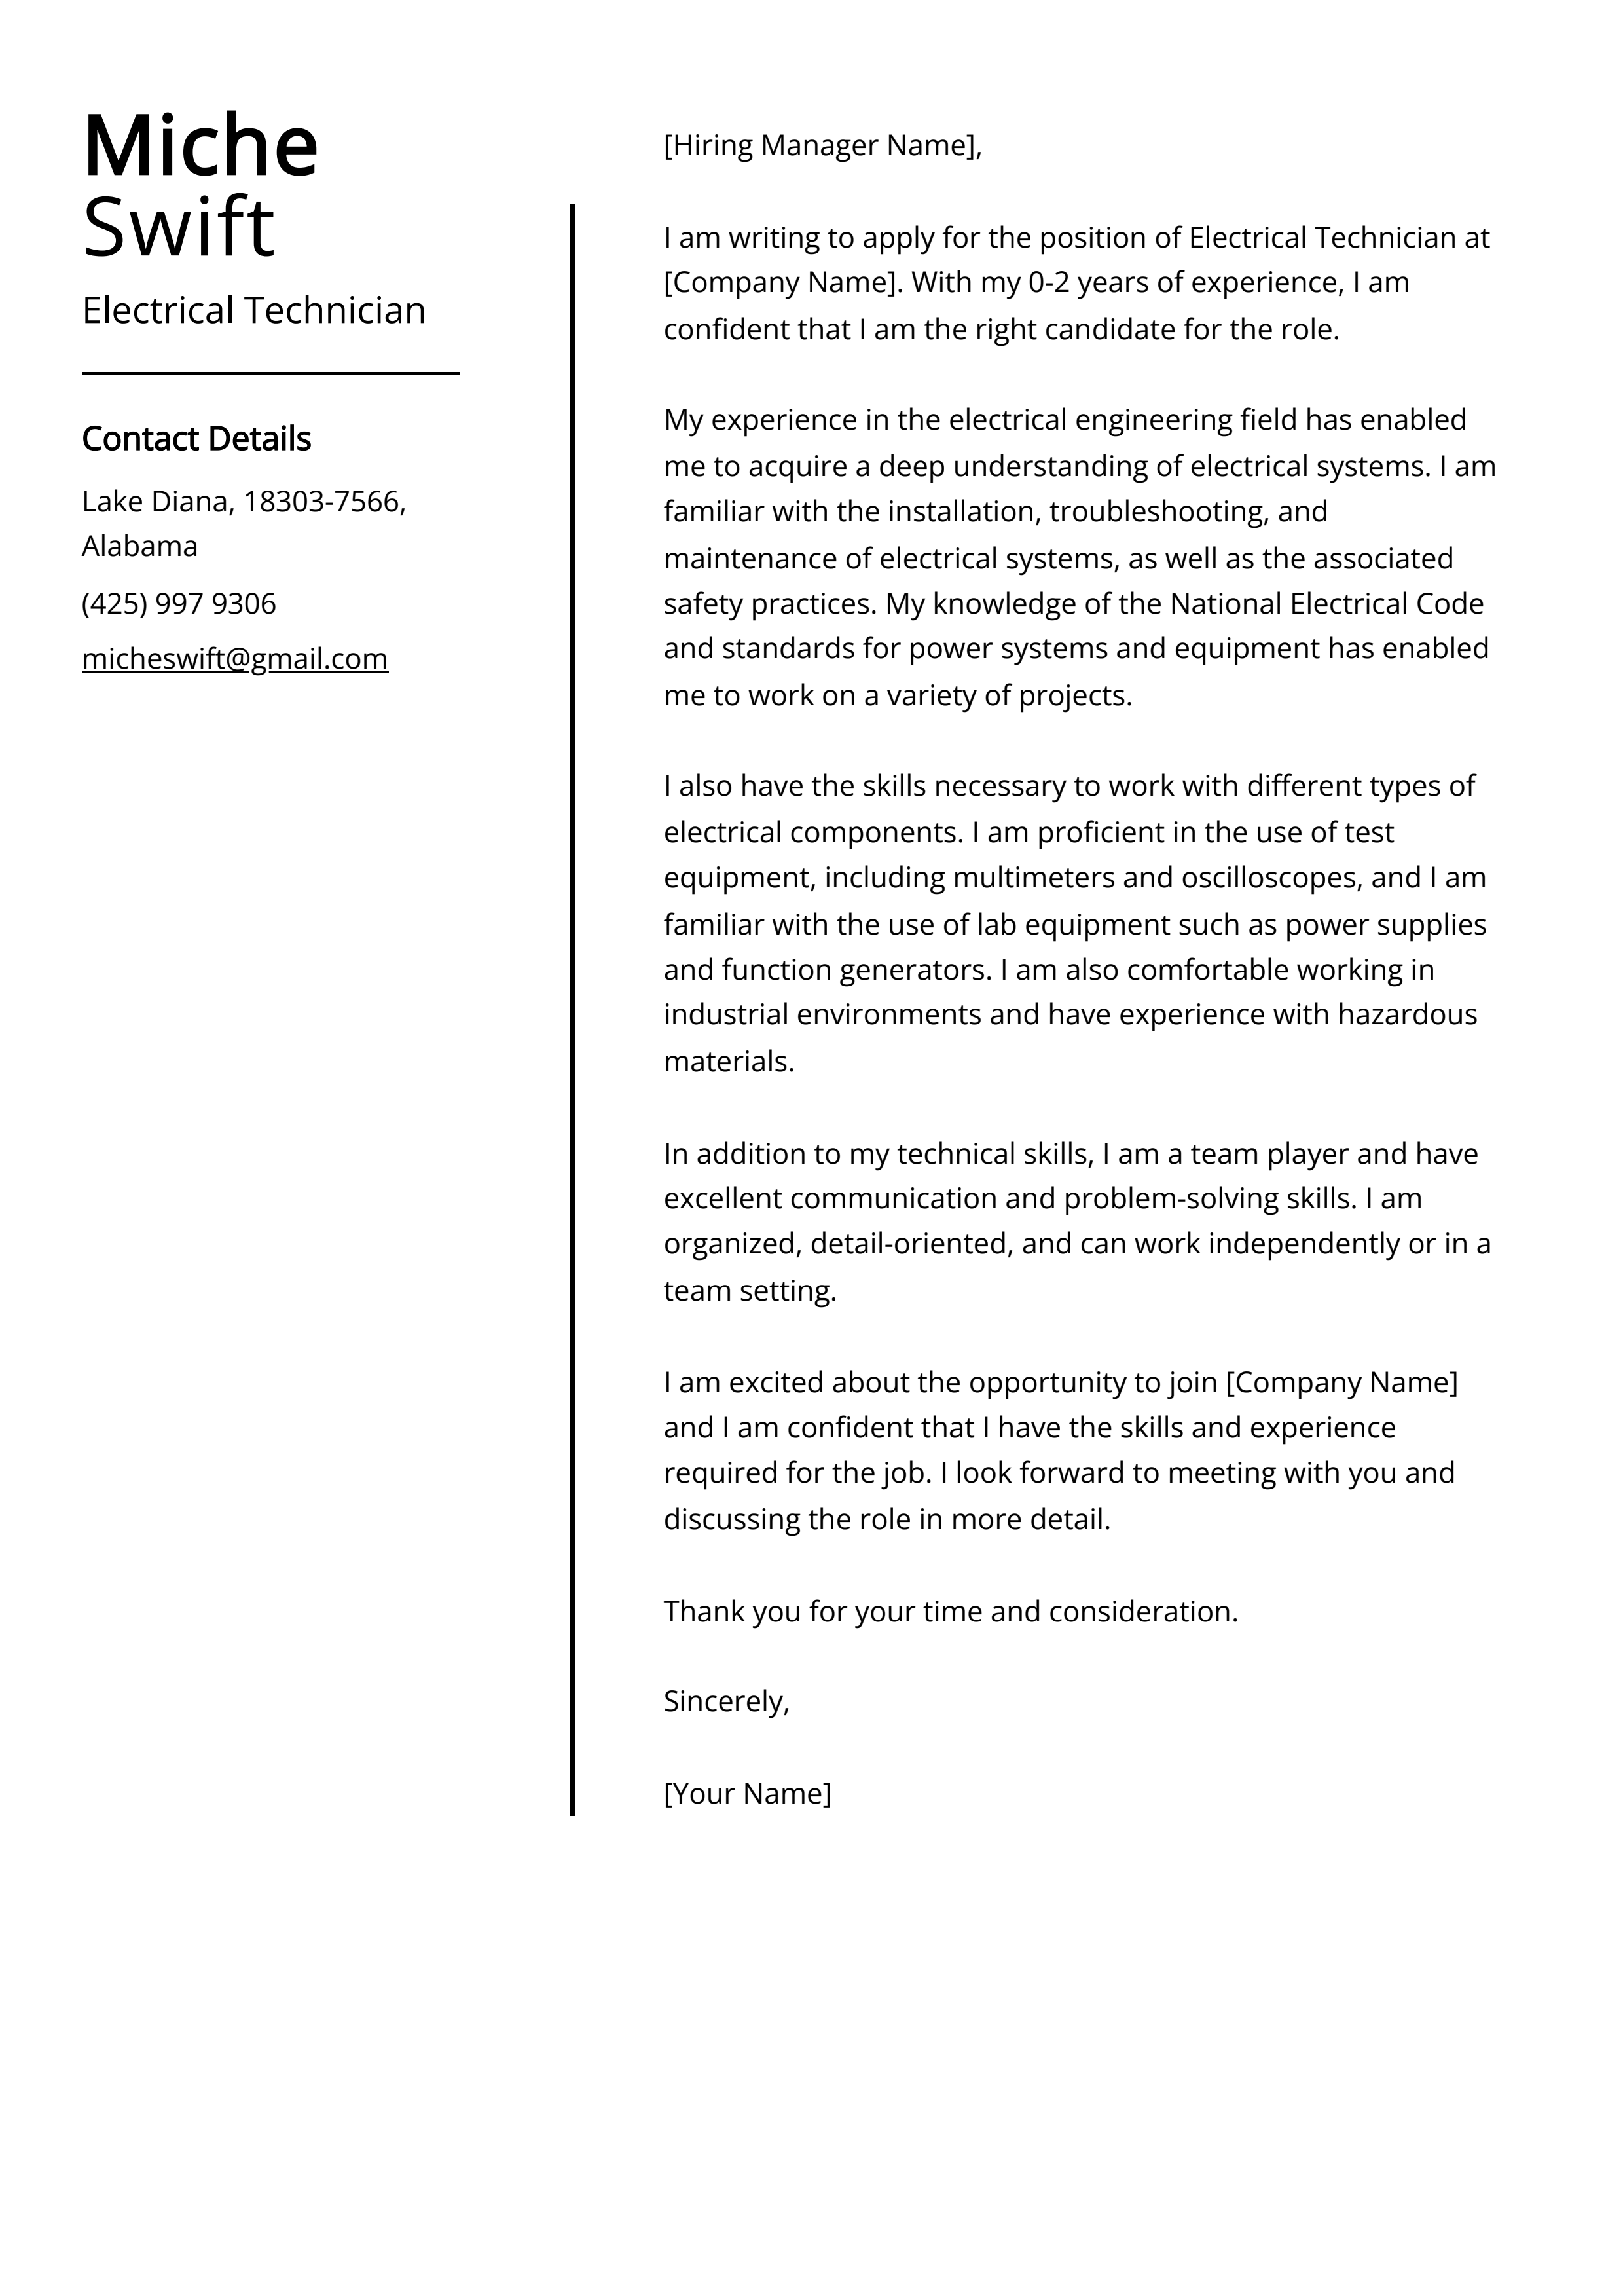 Electrical Technician Cover Letter Example